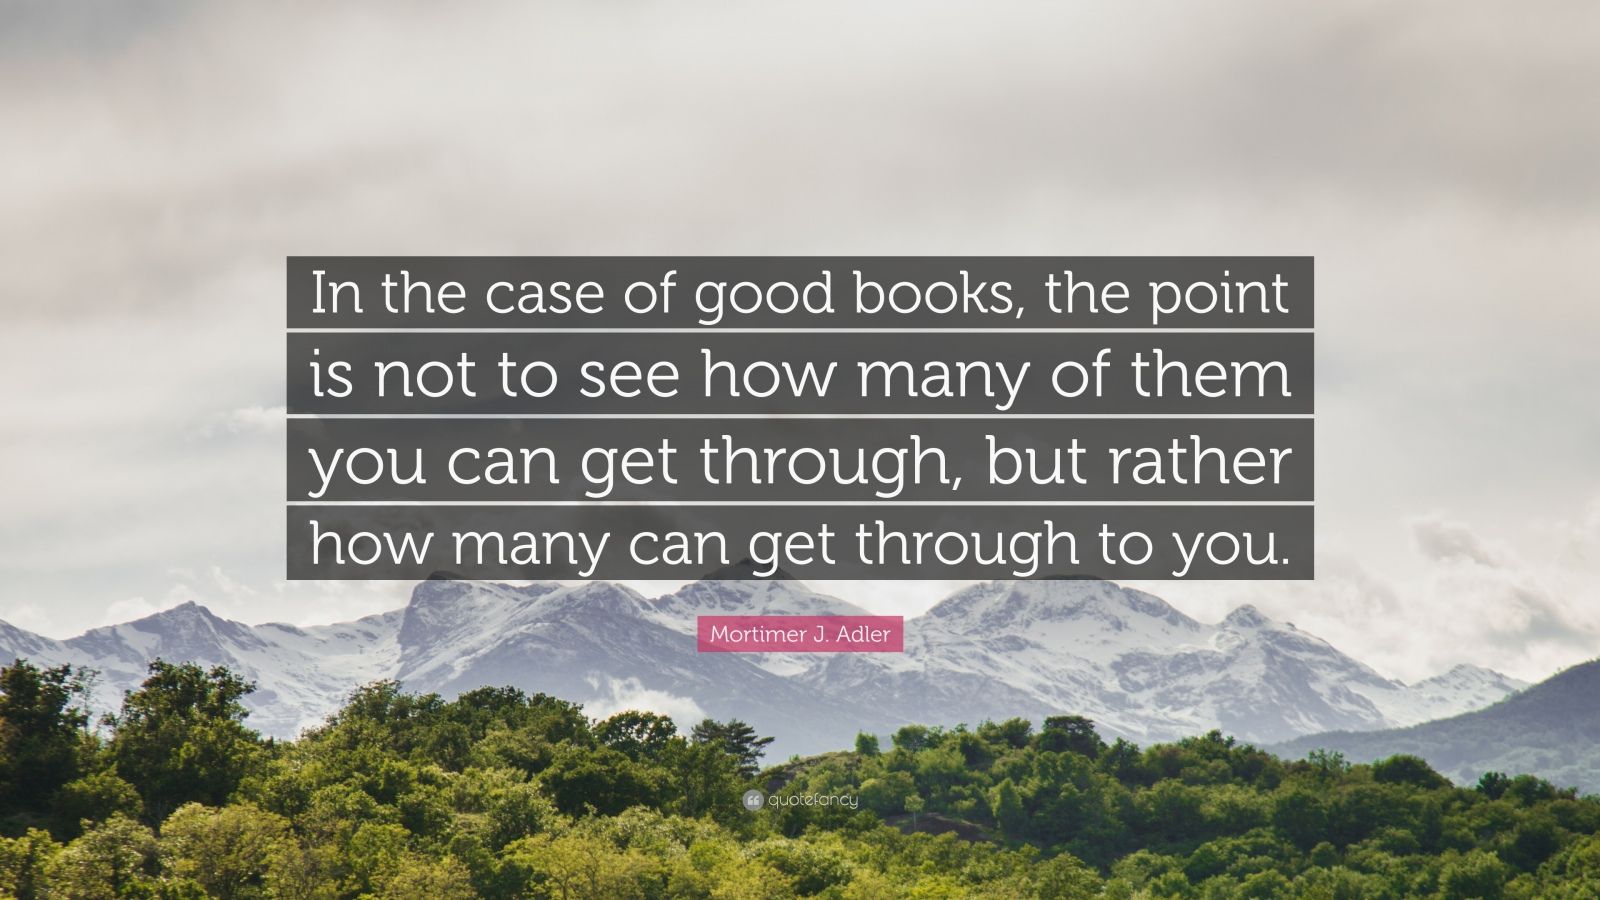 Mortimer J. Adler Quote: “In the case of good books, the point is not to see how many of them you can get through, but rather how many can get through to you.”